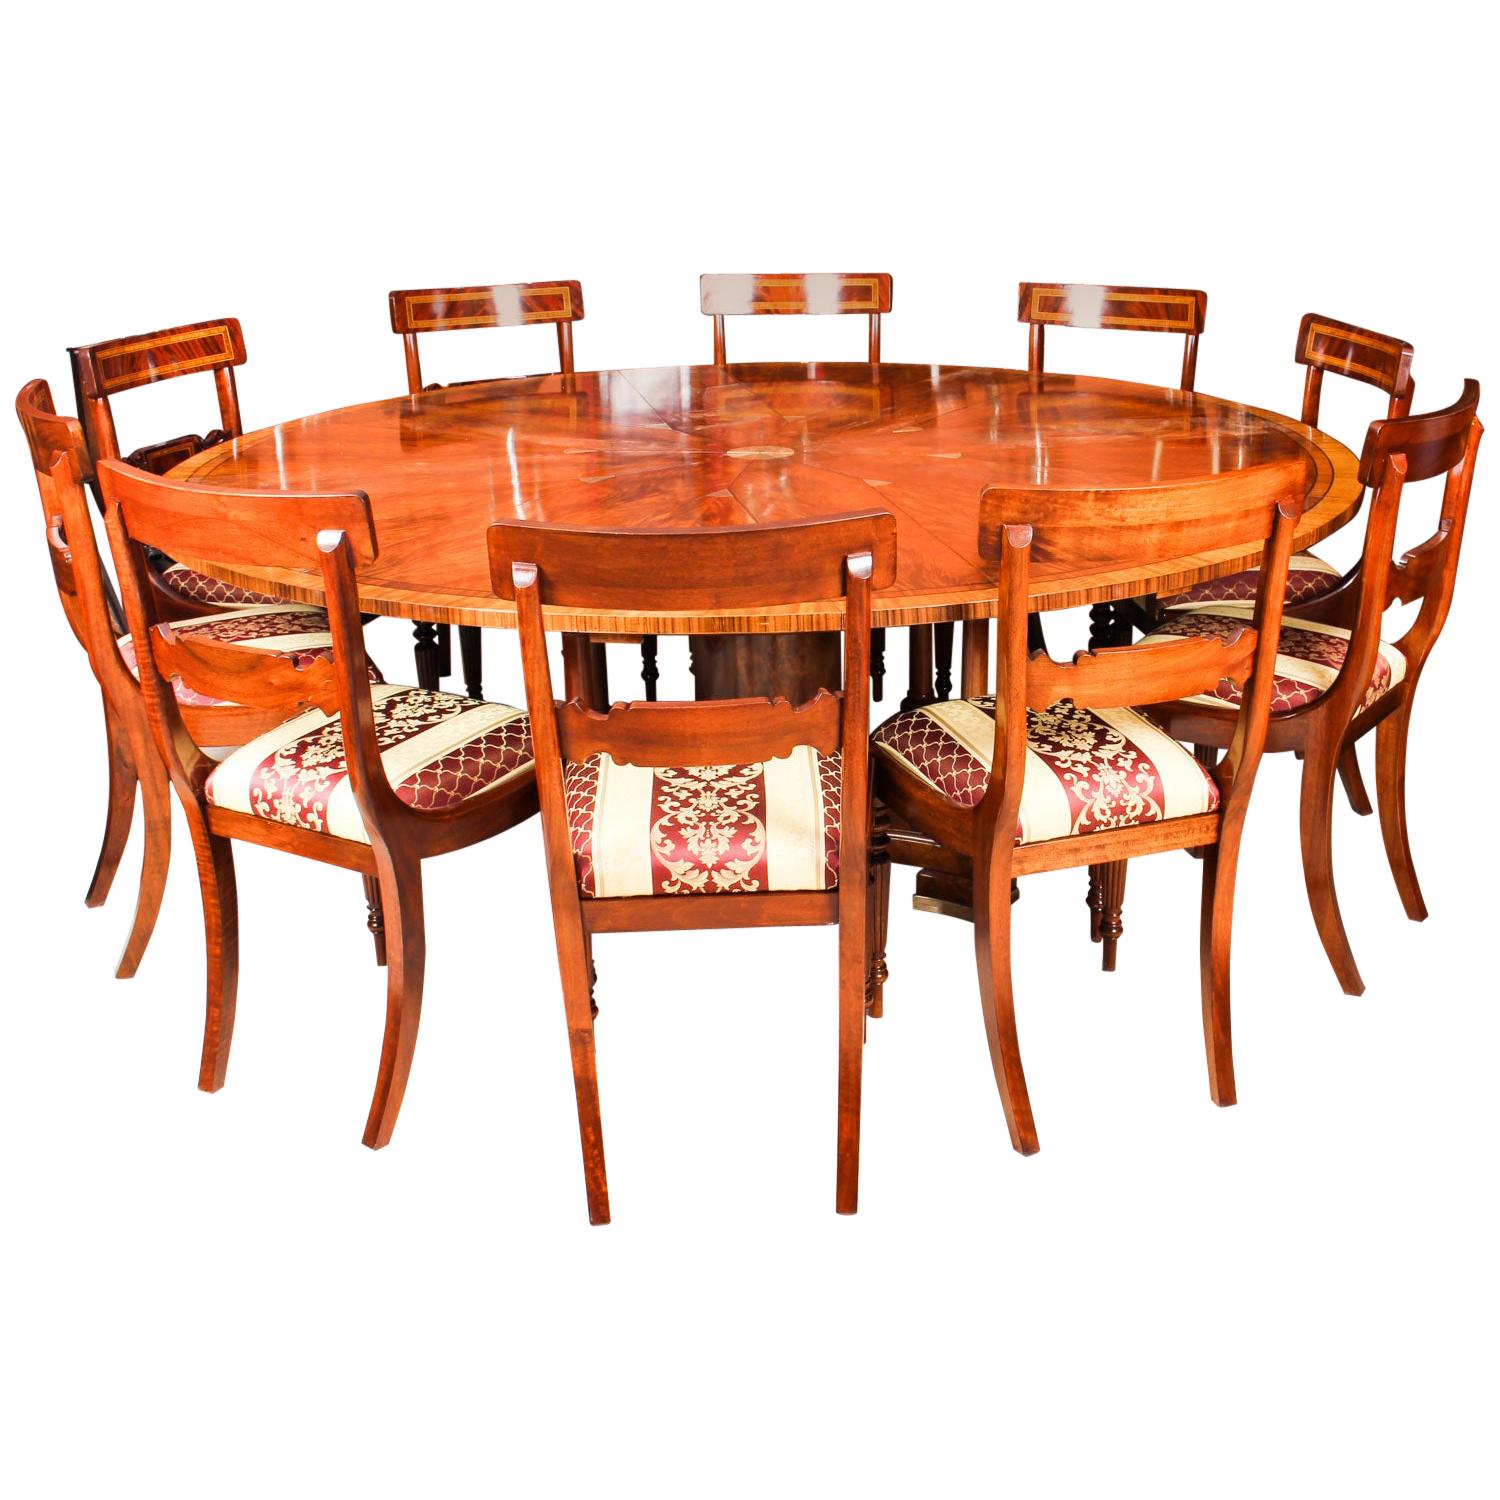 Antique Flame Mahogany Jupe Dining Table 20th Century and 10 chairs